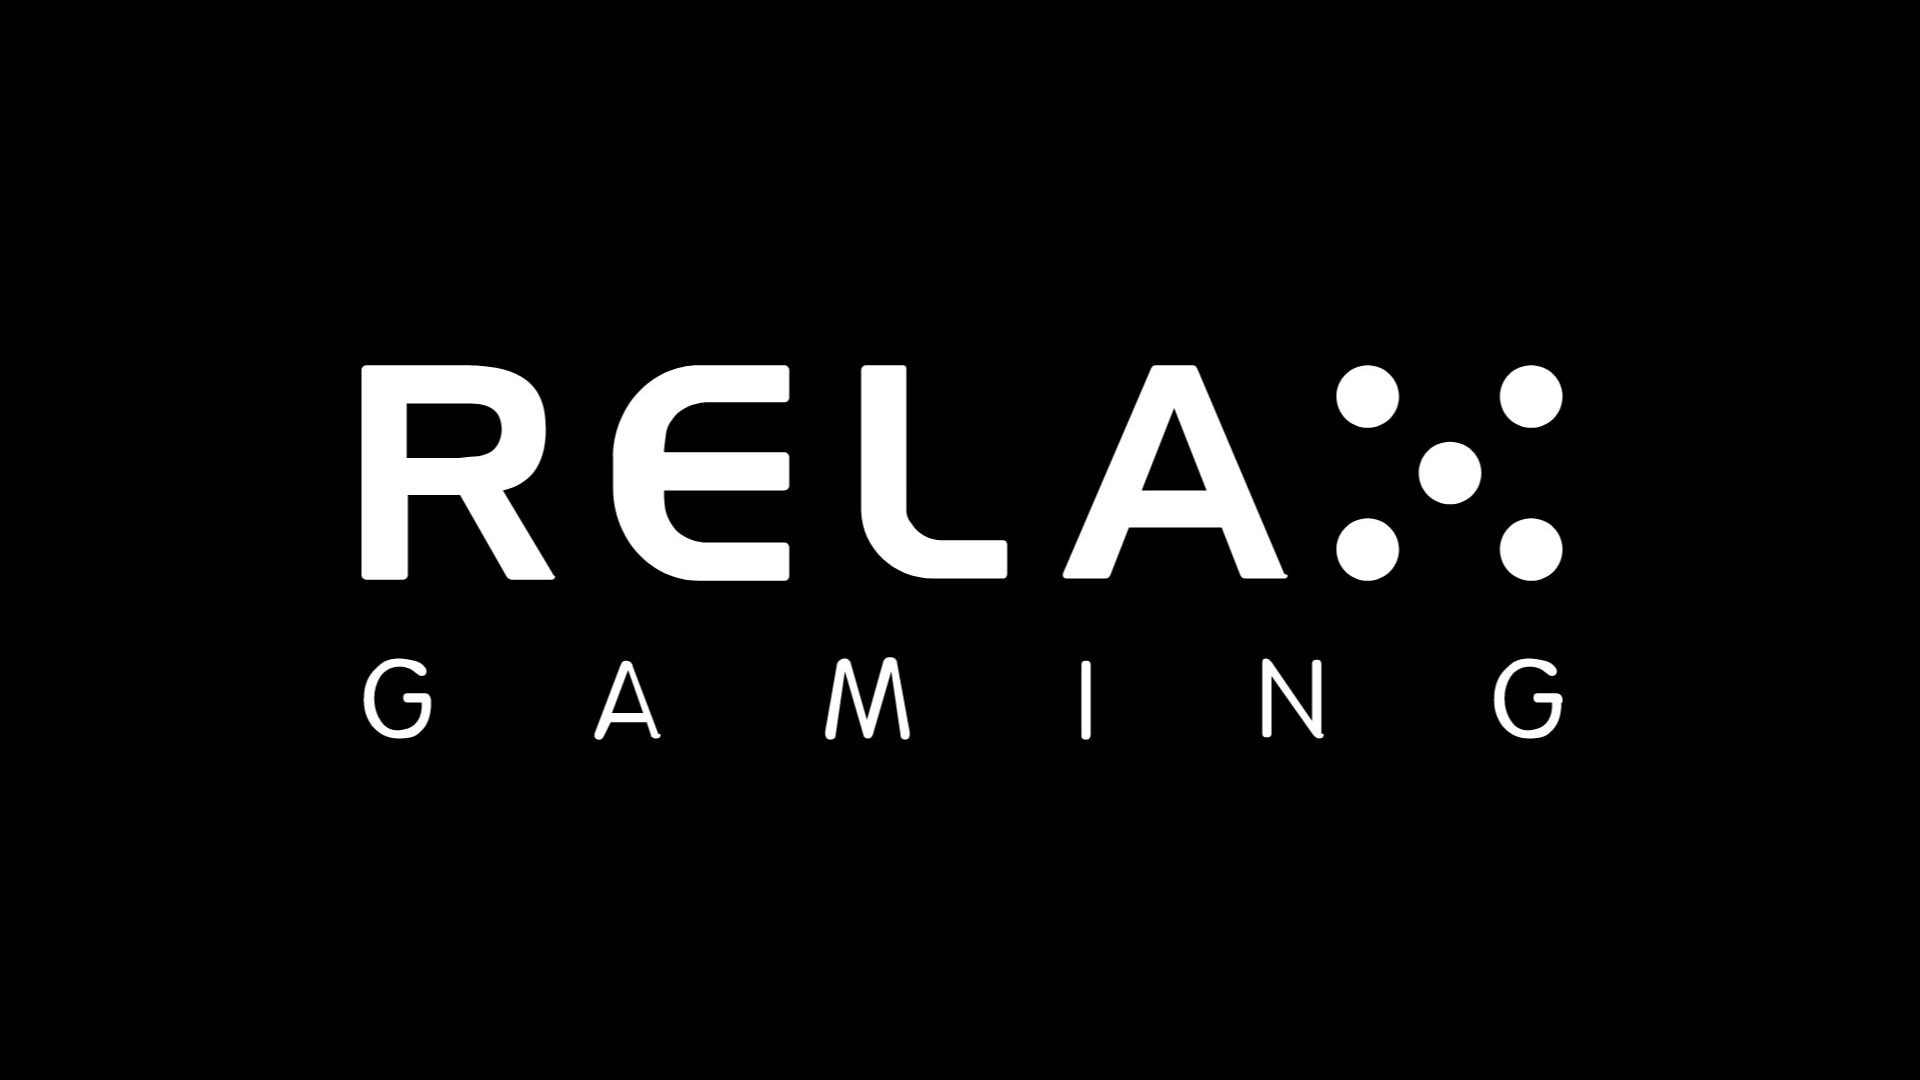 Relax Gaming live in Greece  following Novibet deal